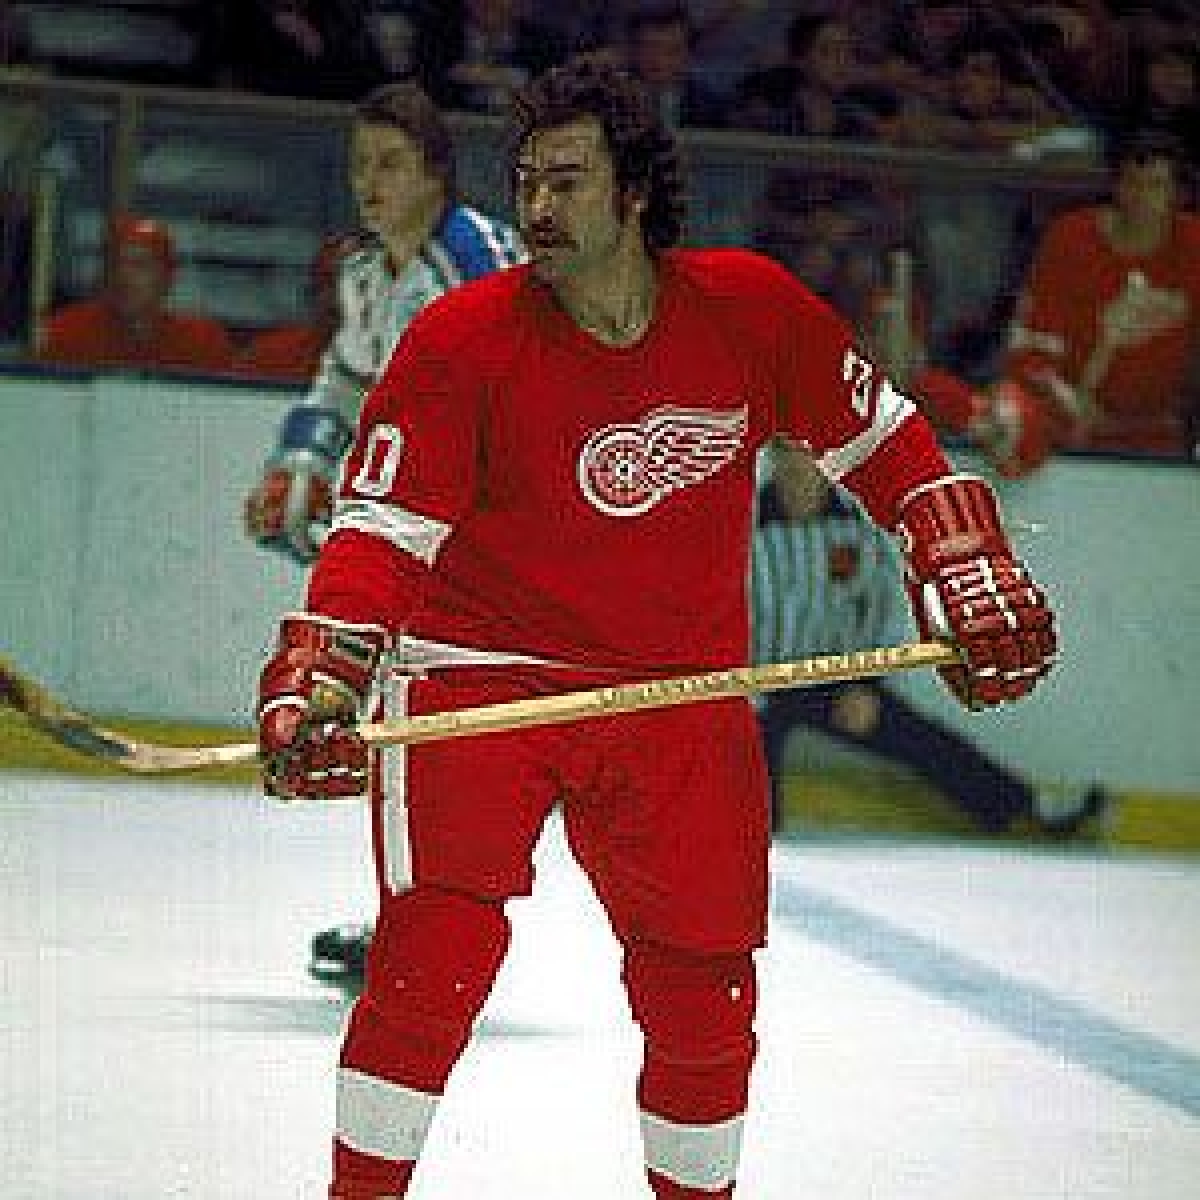 Detroit Red Wings - ‪#RedWings on this day: 3/27/1973: Mickey Redmond  becomes the first player in Red Wings' history to reach the 50-goal plateau  in a season. ‬